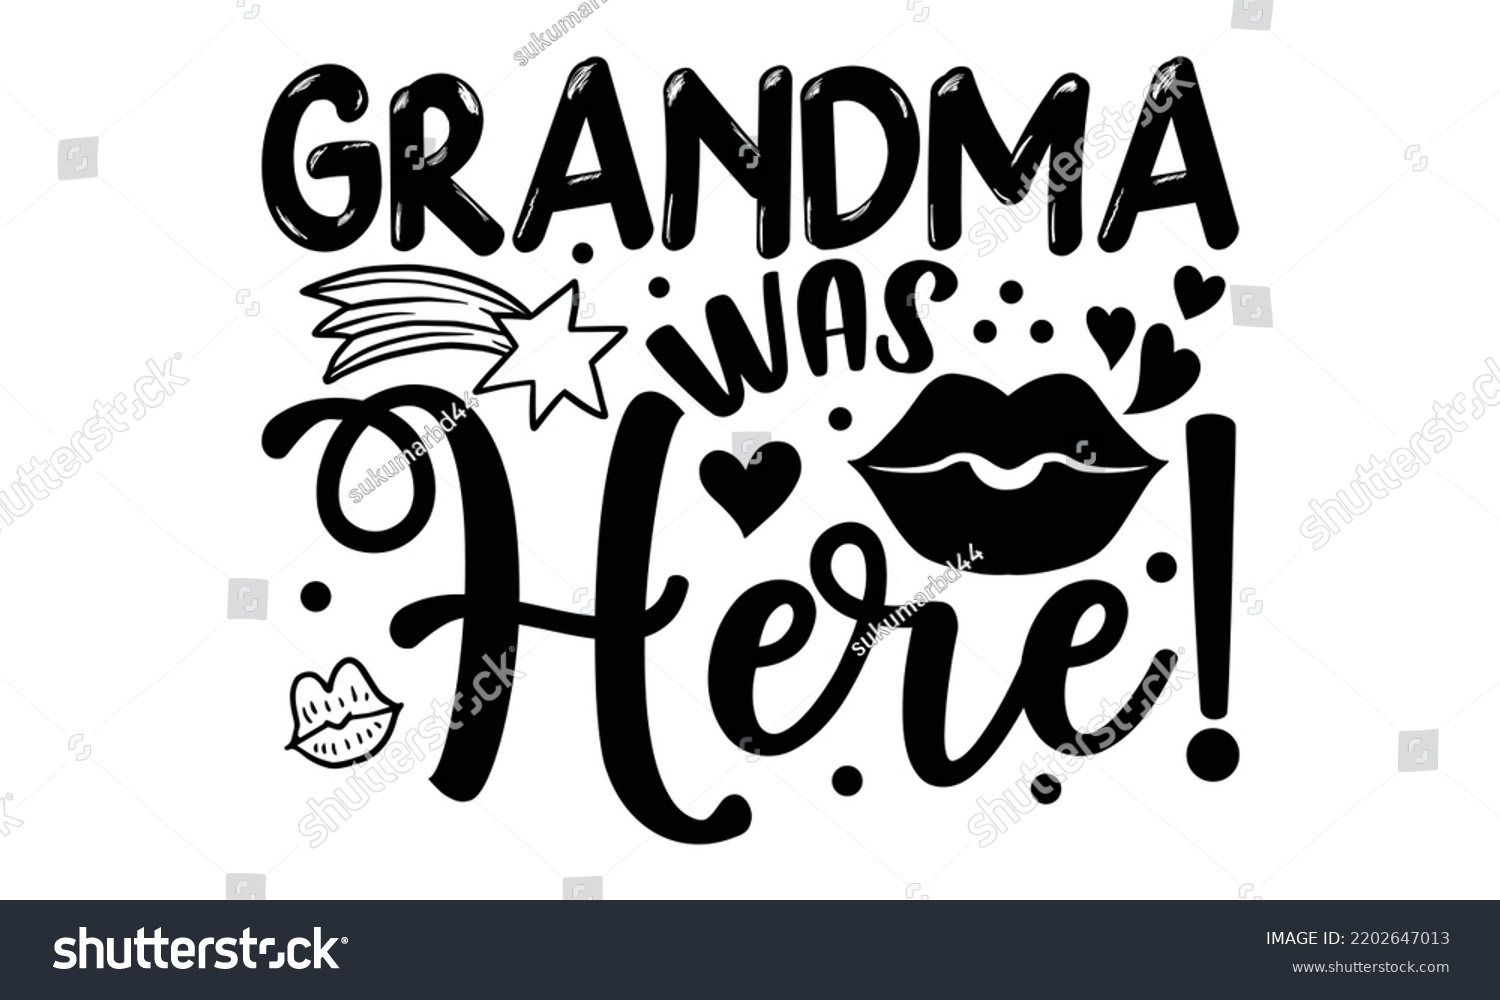 SVG of Grandma Was Here! - Valentine's Day t shirt design, Hand drawn lettering phrase isolated on white background, Valentine's Day 2023 quotes svg design. svg